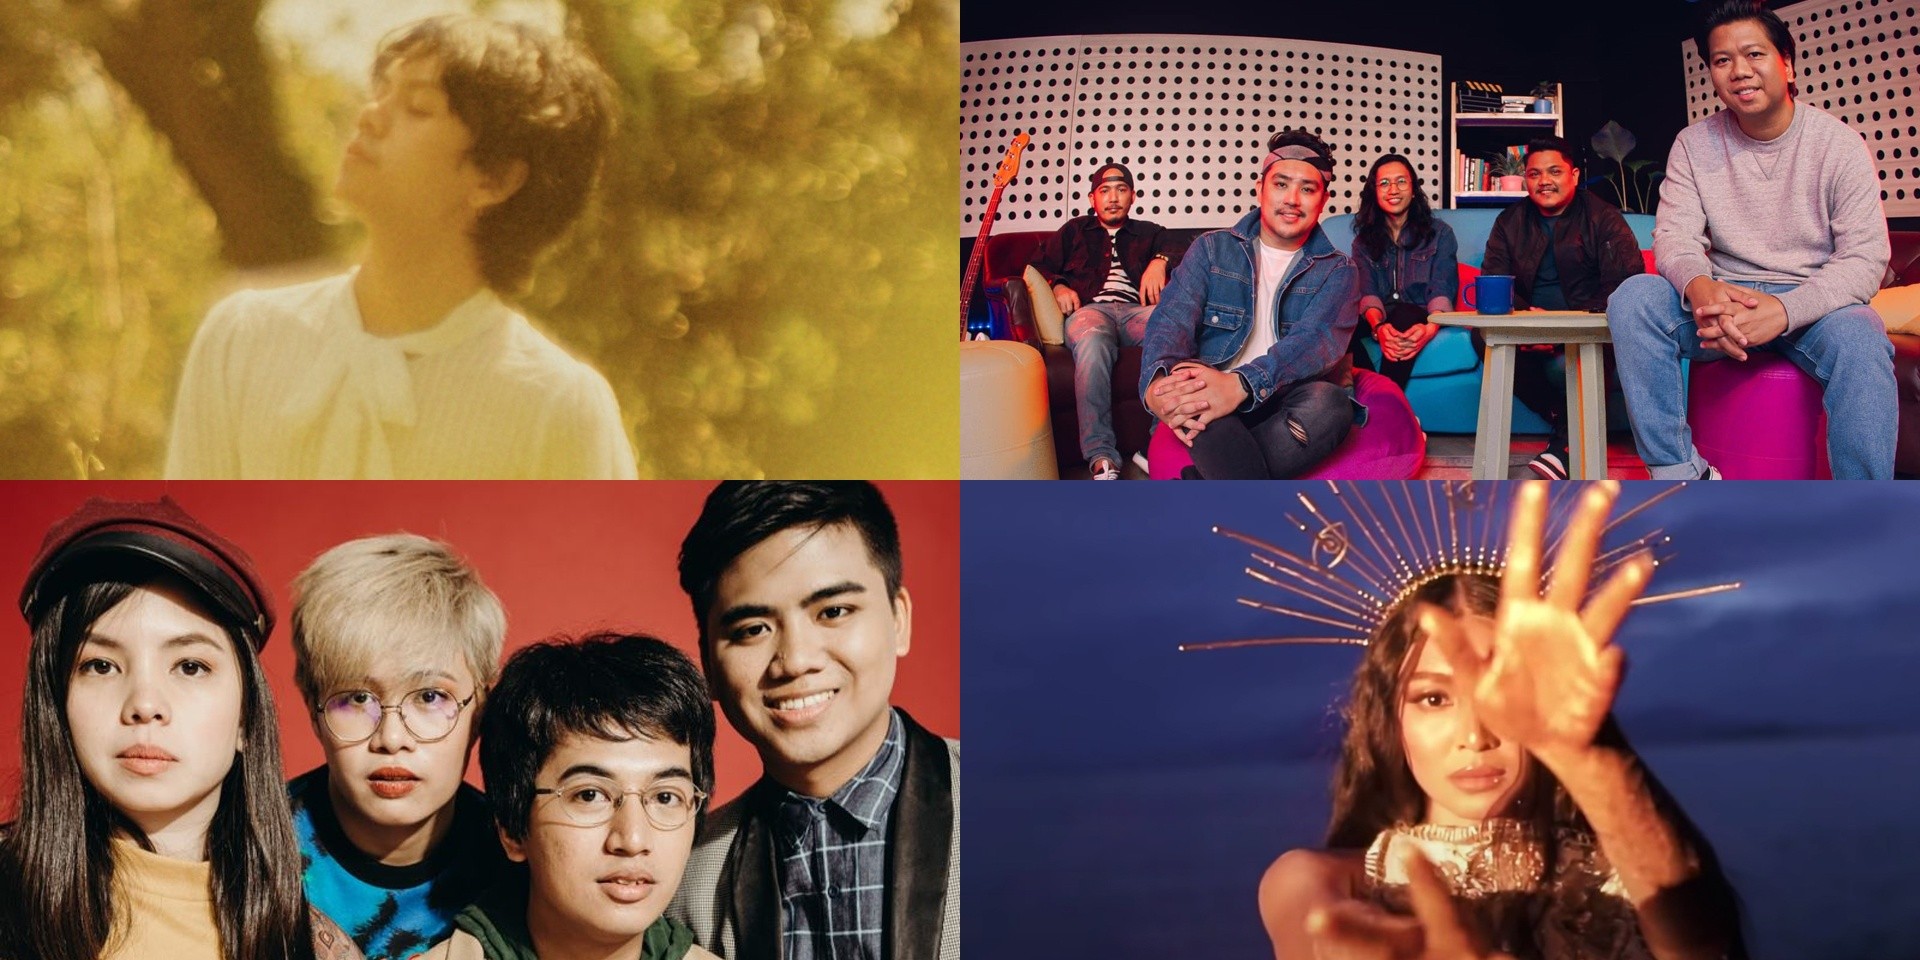 Zild, December Avenue, Nadine Lustre, Oh, Flamingo!, and more release new music – listen